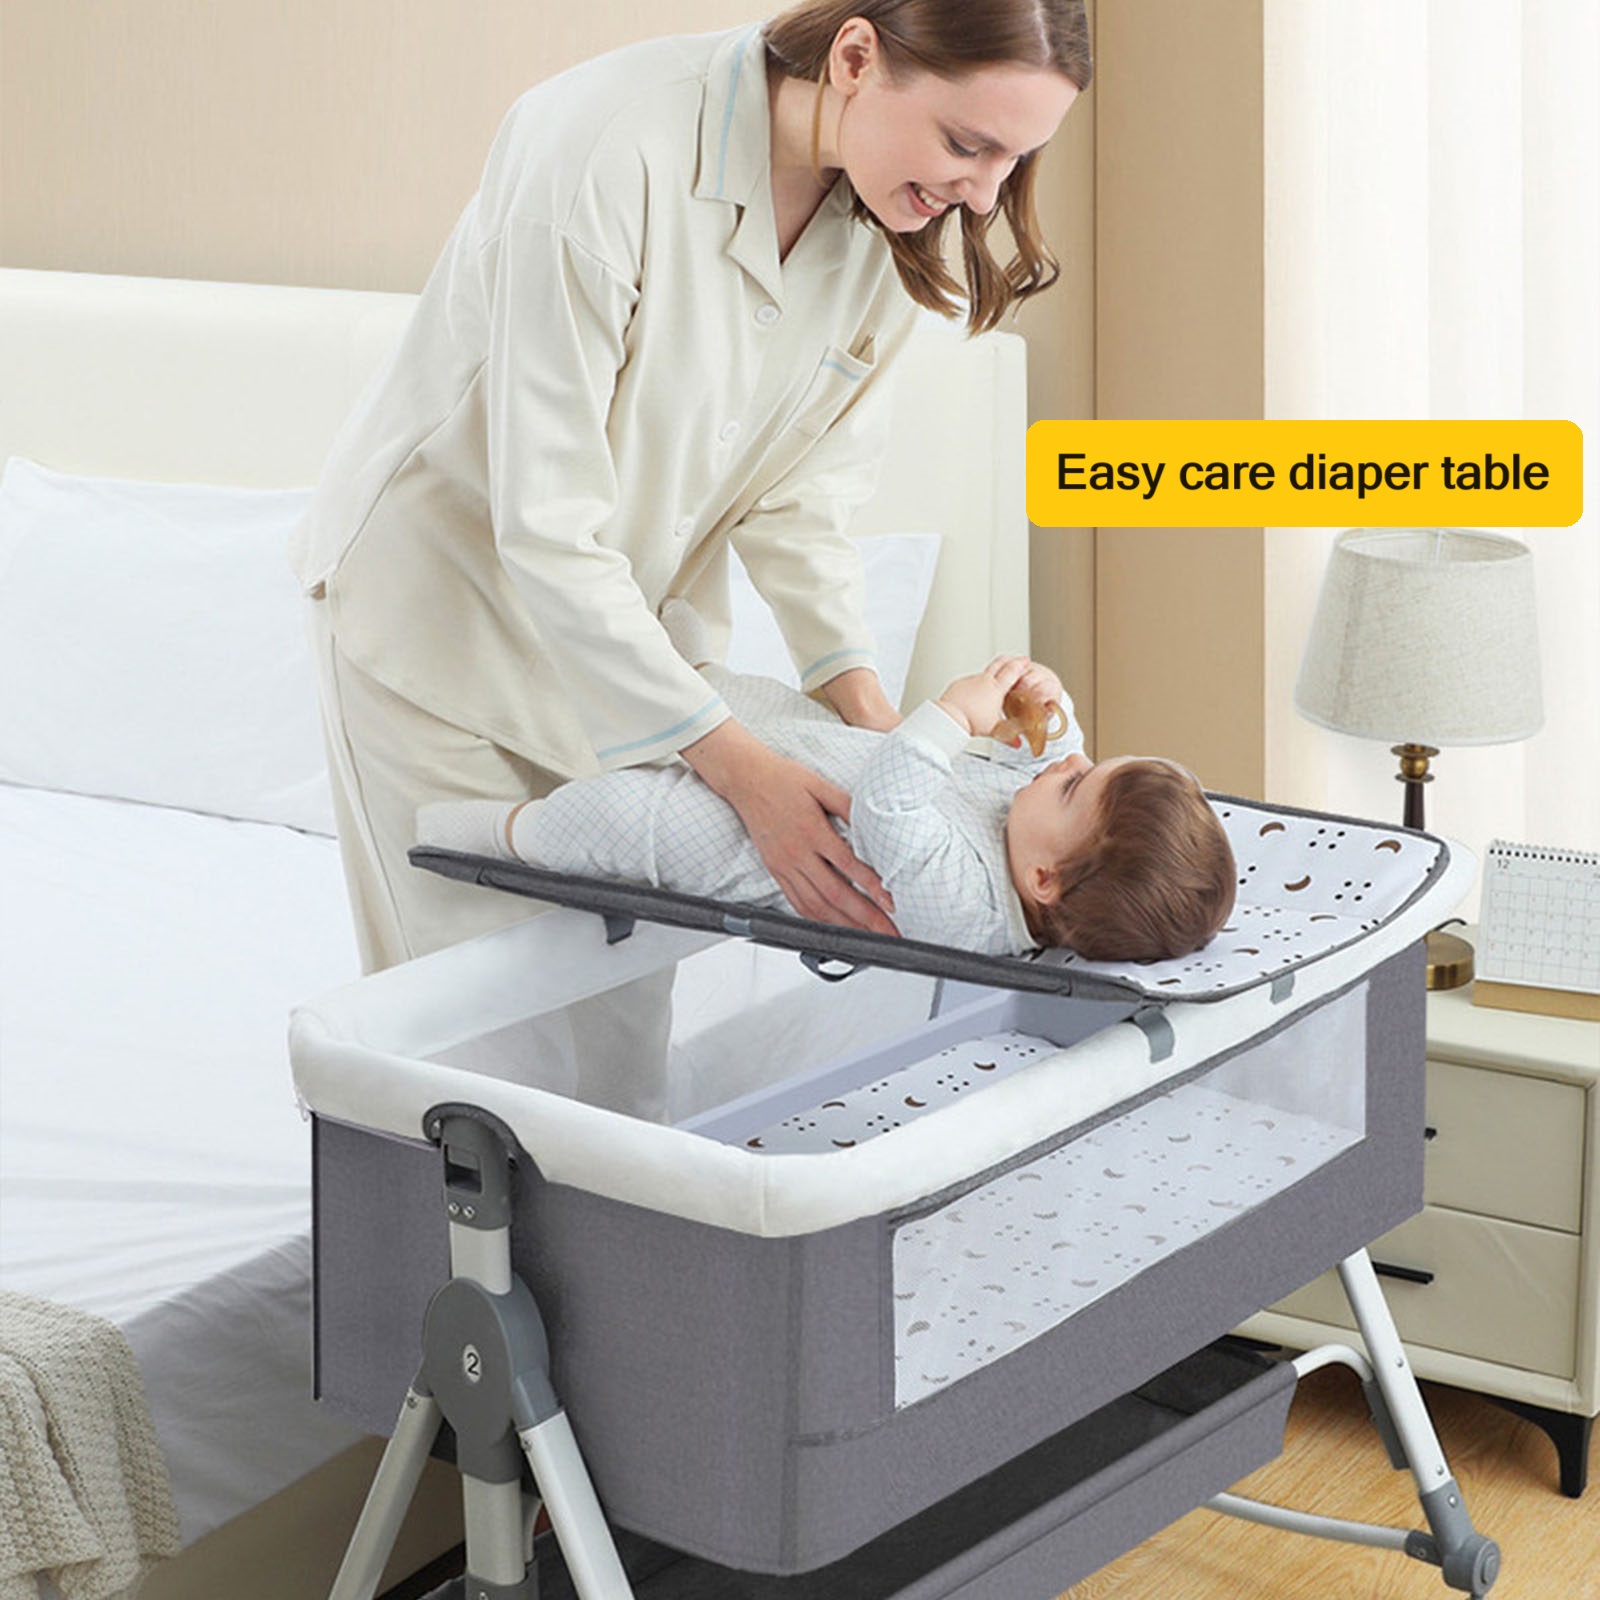 EONROACOO Foldable Baby Bassinet with Changing Table, Adjustable Bedside Crib for Infant, Gray - image 5 of 11